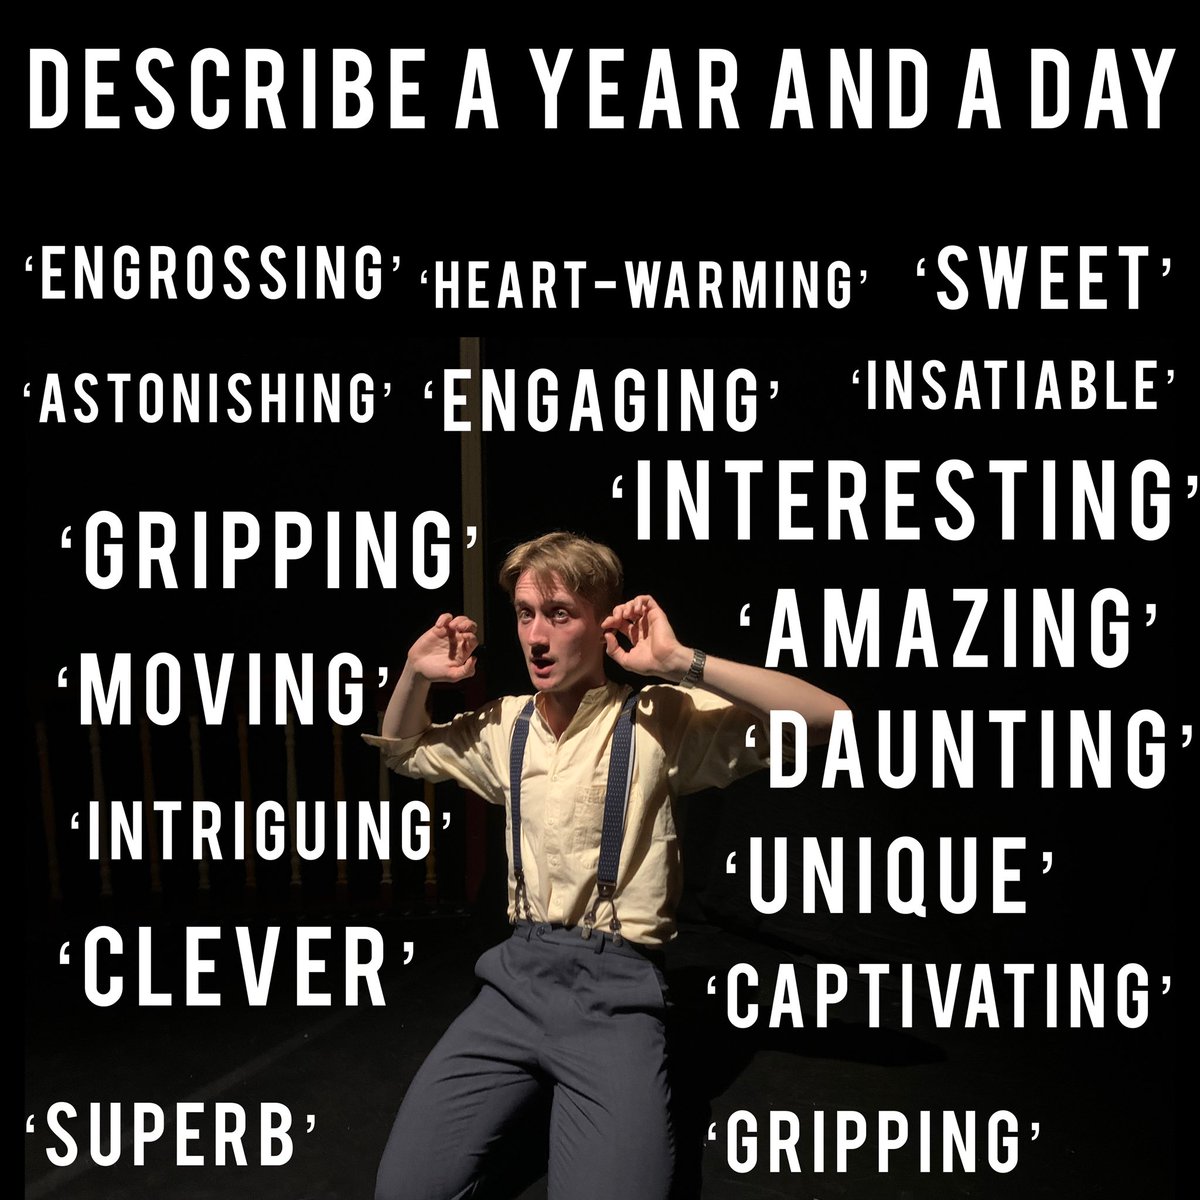 Here’s our feedback from last night at @TheHopeTheatre People are really loving this show. 

You’ve got one chance to see A Year and a Day tonight. Come along! 

ticketsource.co.uk/thehopetheatre…

#edfringe #edfringepreview #summer #london #londonfringe #preview #fringetheatre